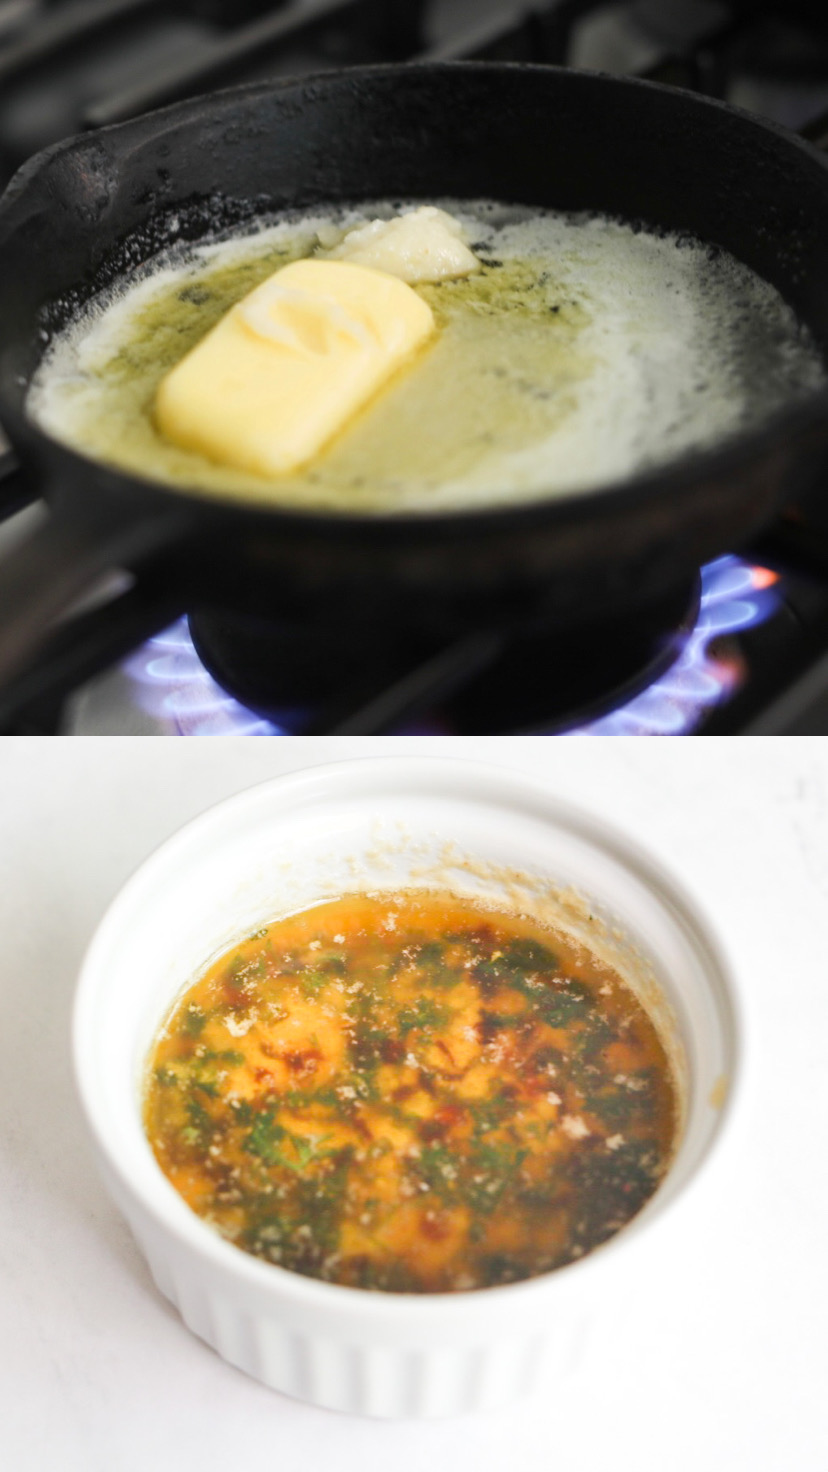 Garlic butter sauce image collage. Top image with melting butter in a black cast iron skillet, bottom image is cooked garlic butter sauce in a white ramekin.